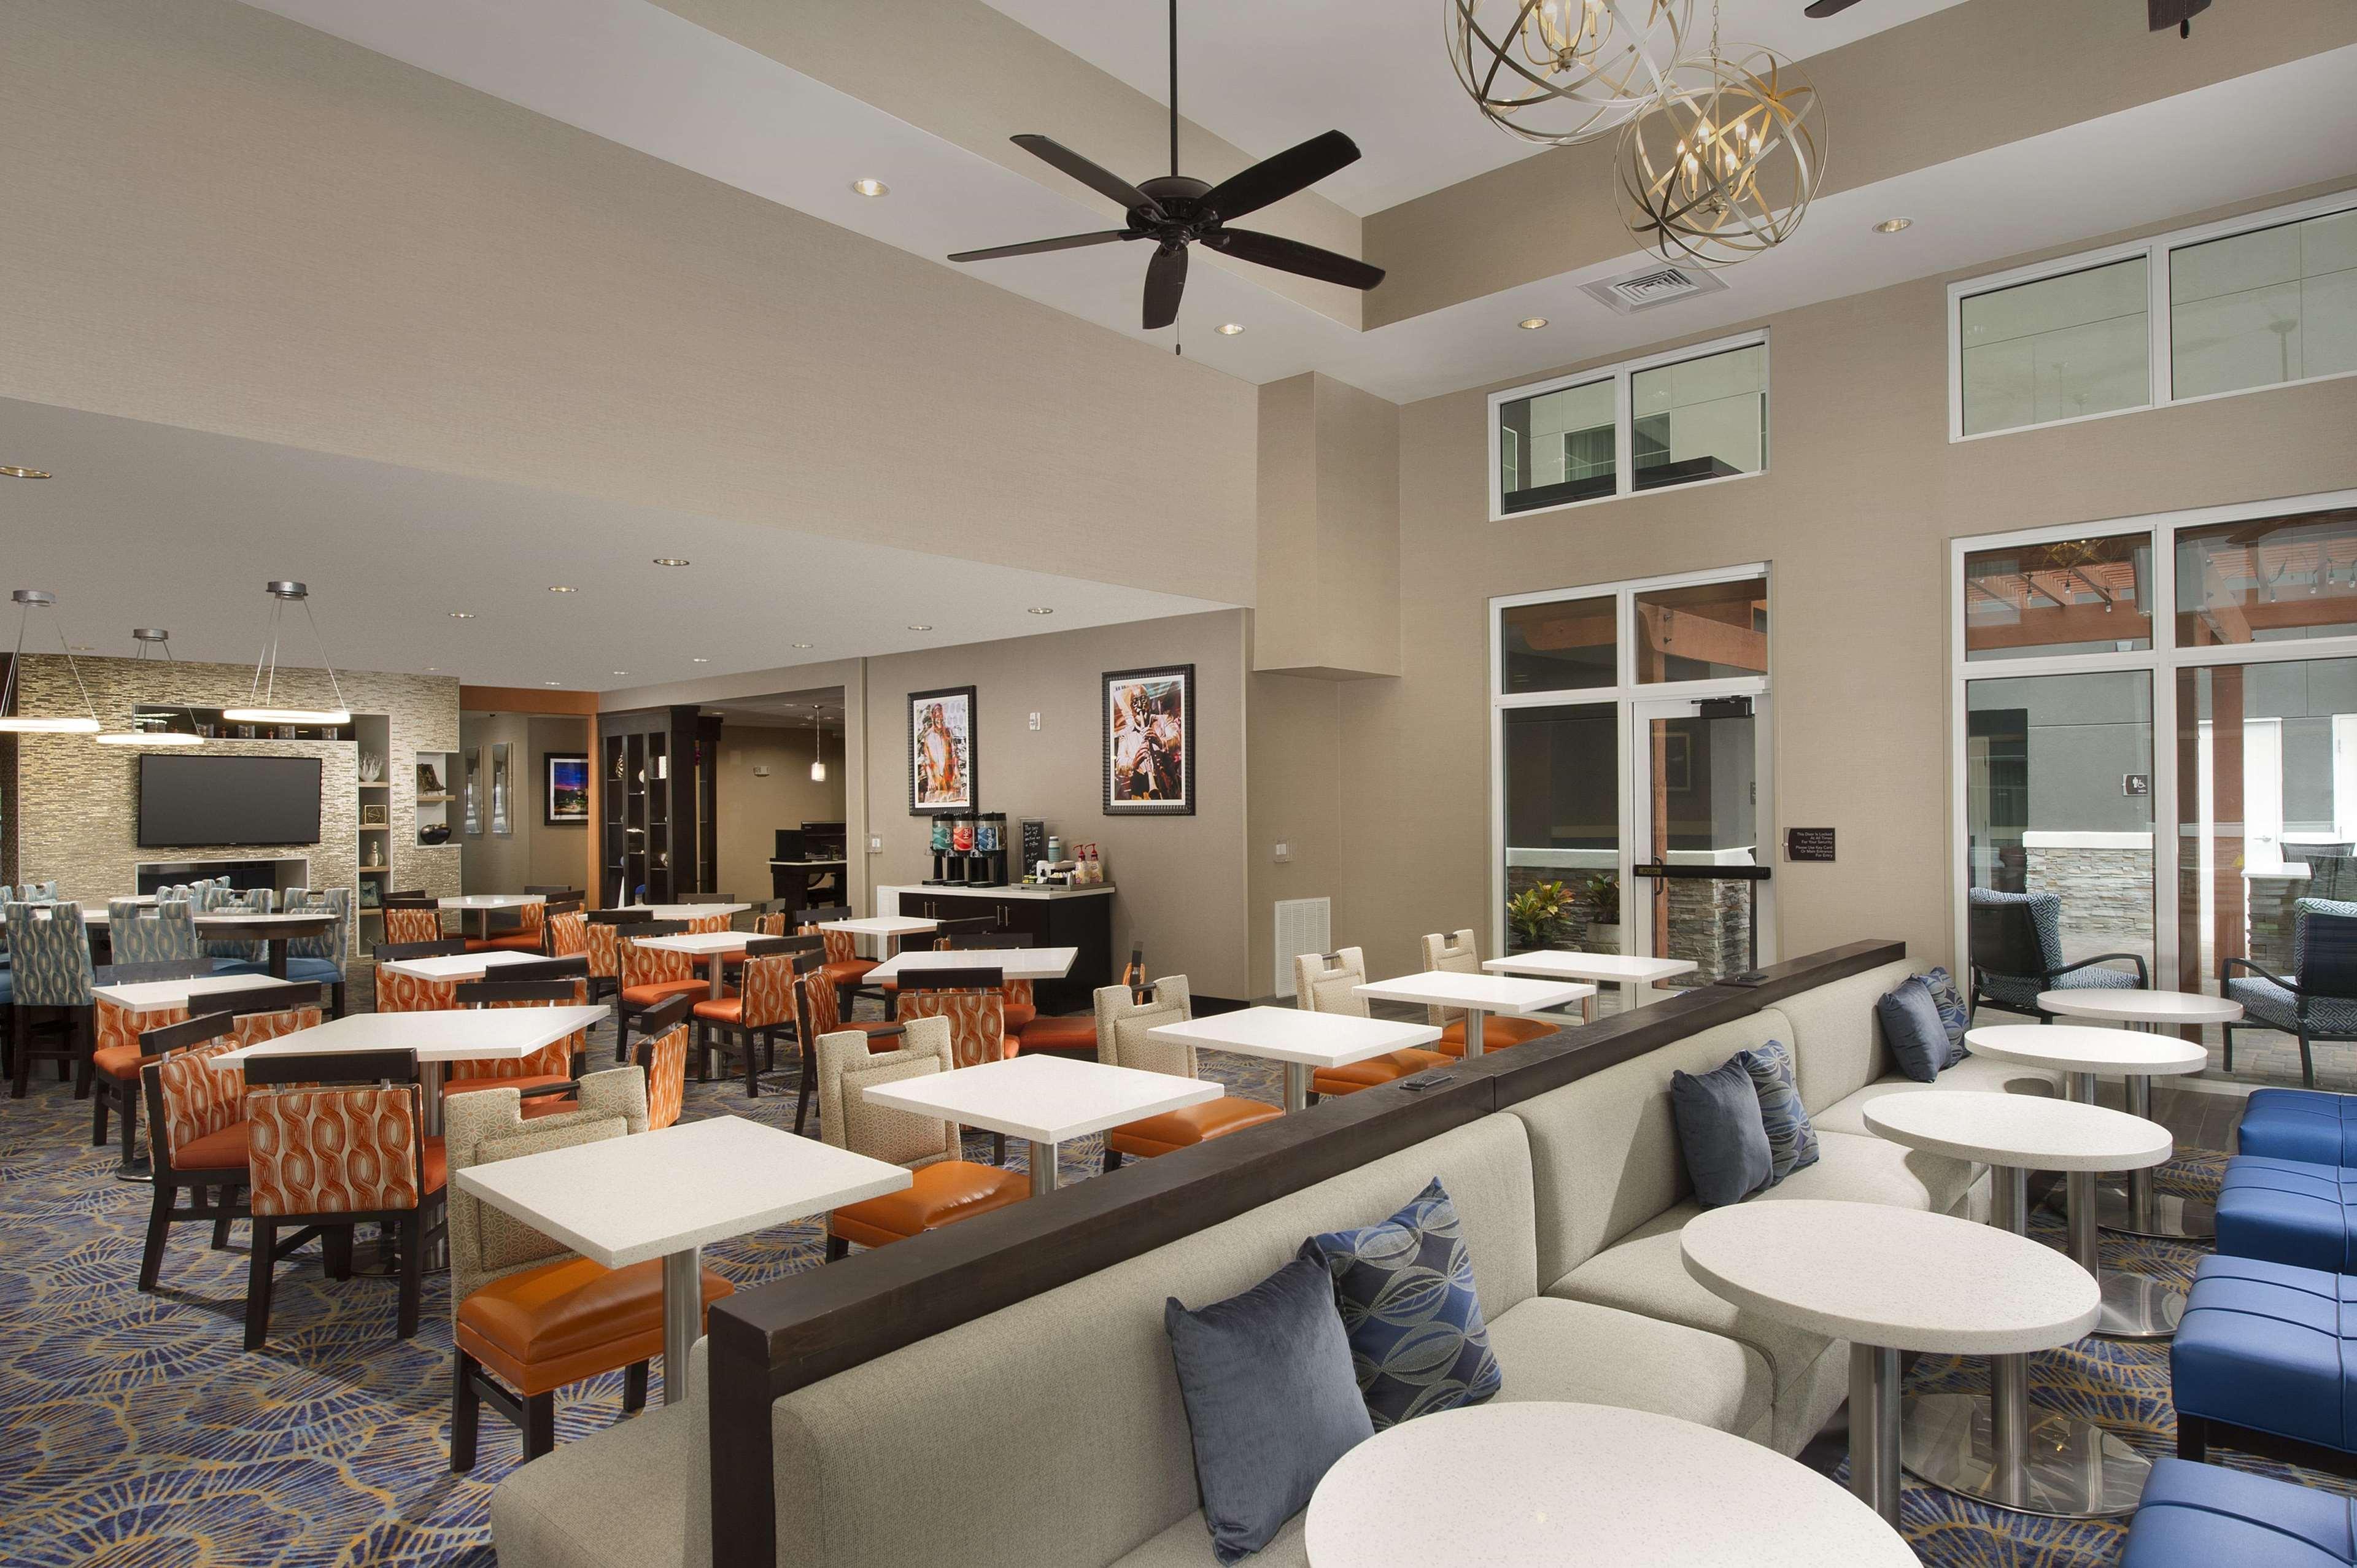 Homewood Suites By Hilton Metairie New Orleans Facilities photo